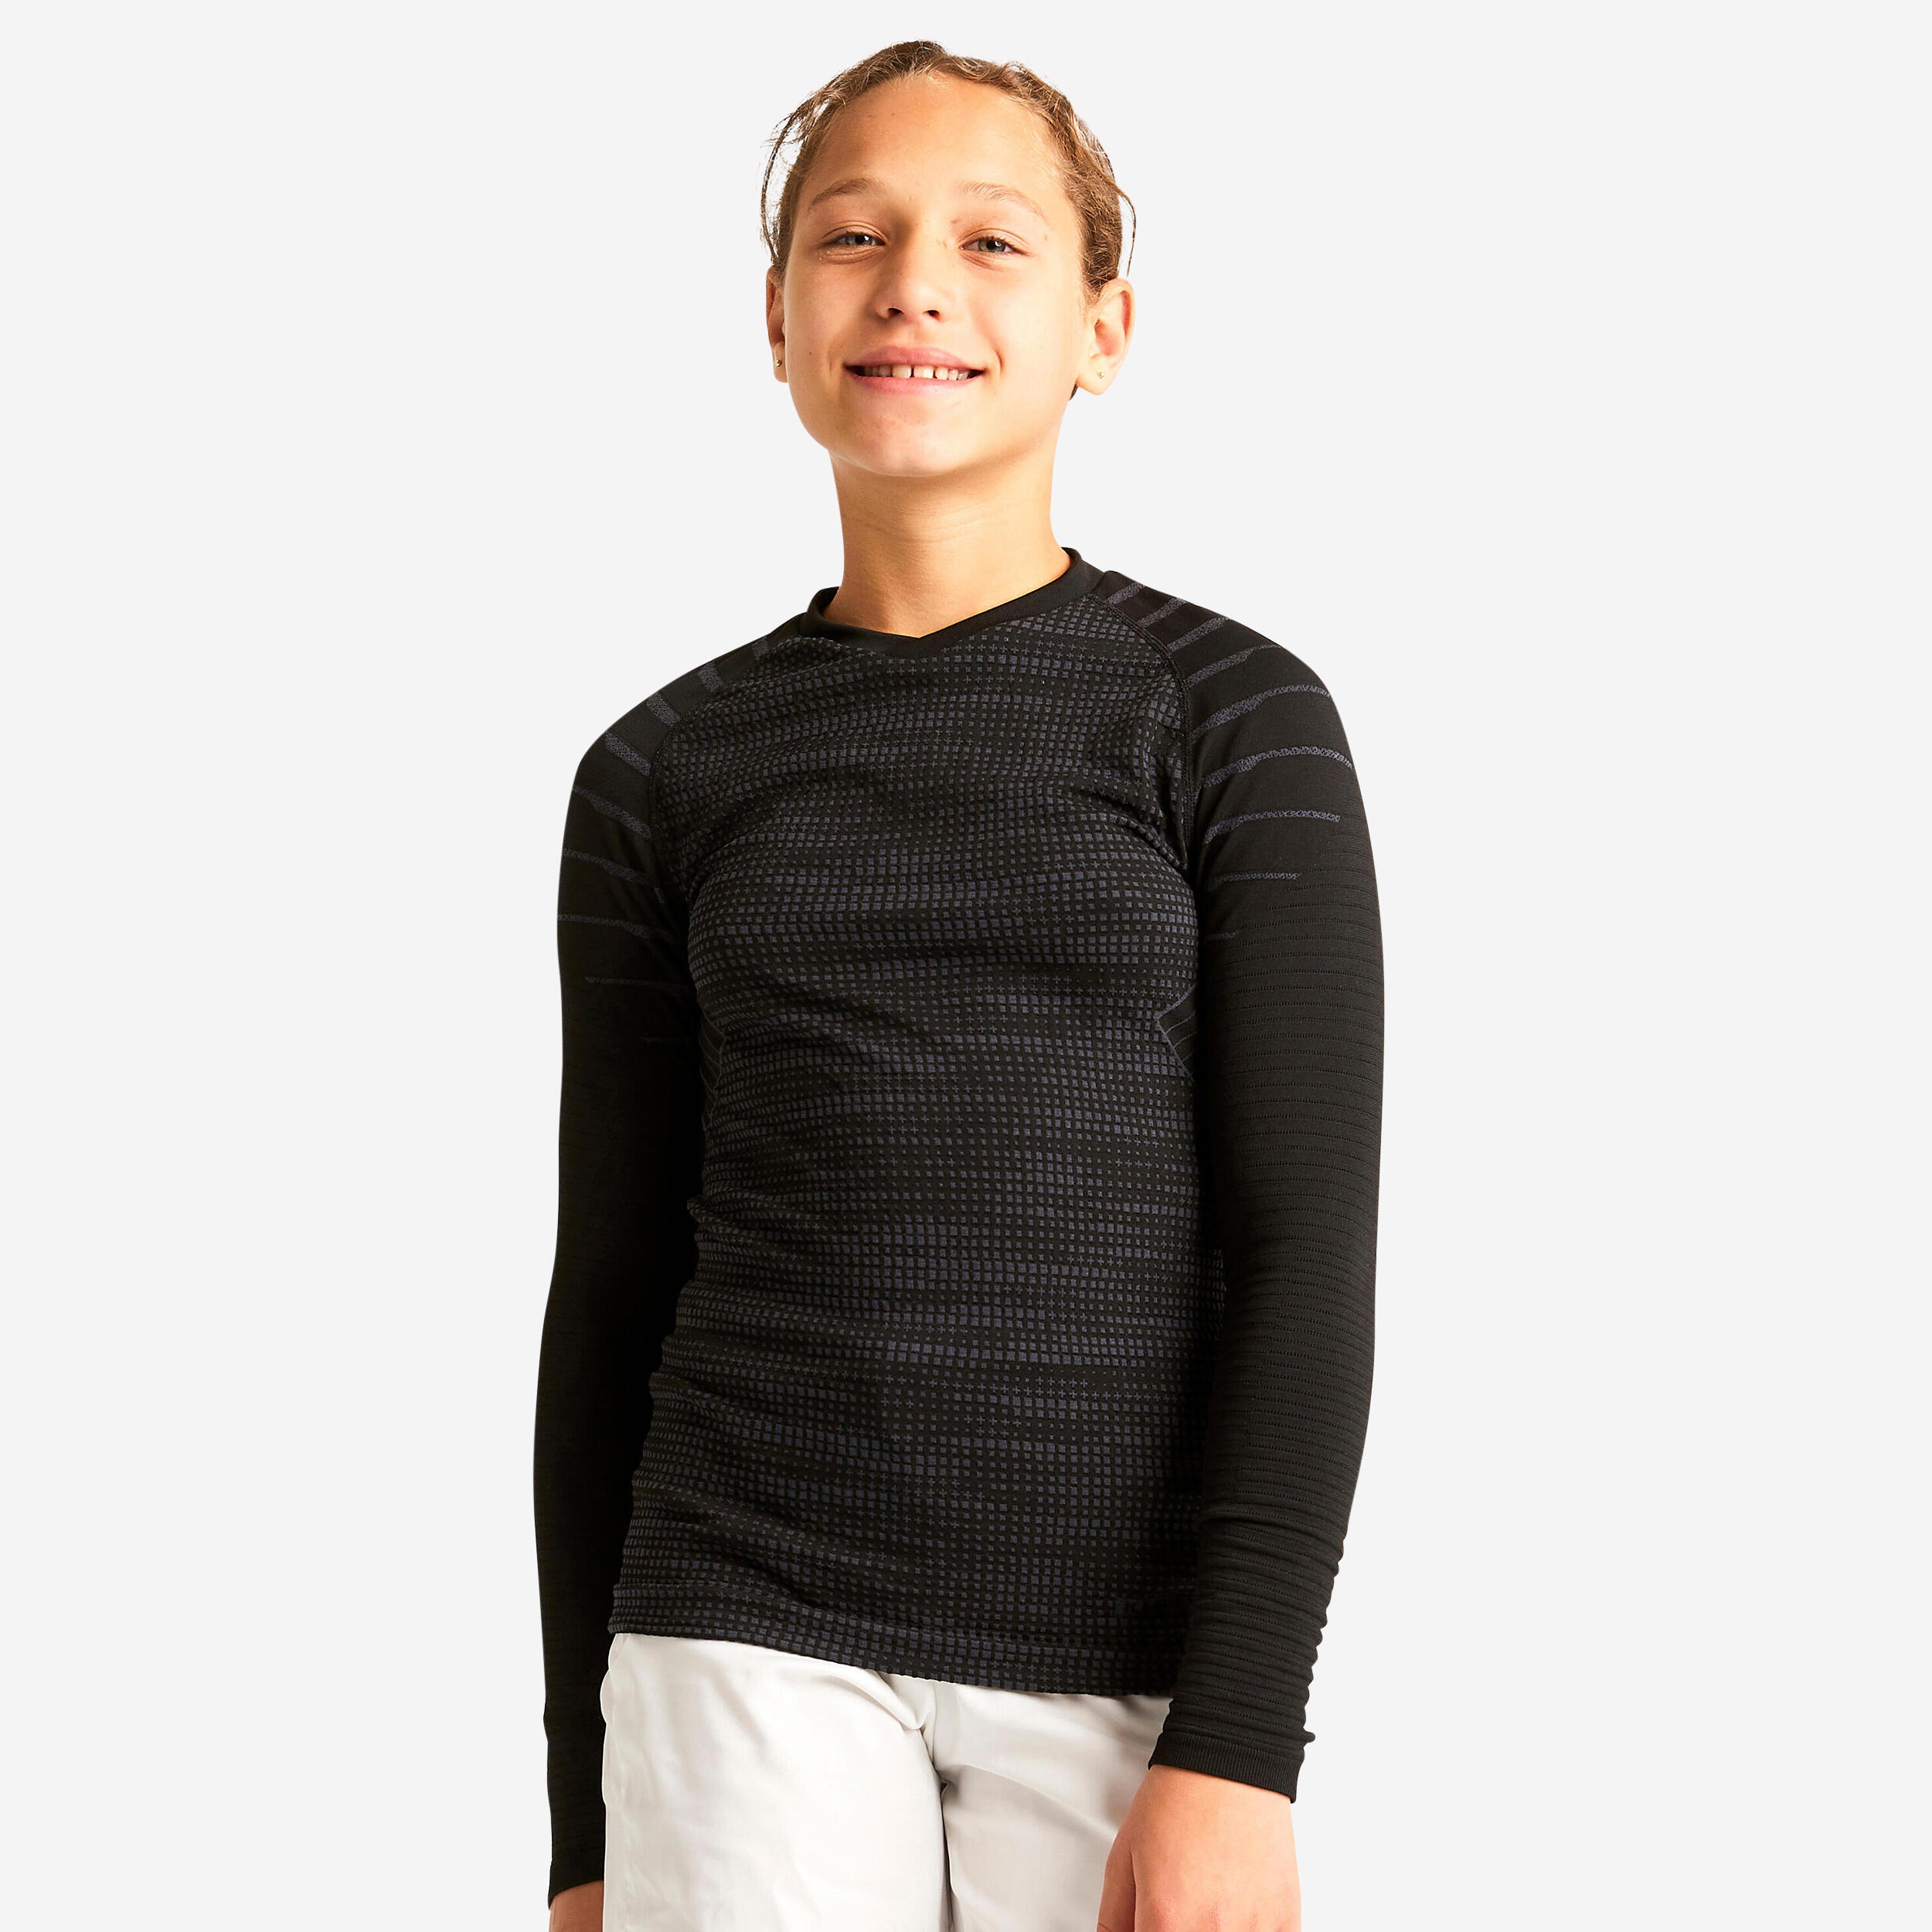 LS Thermal Base Layer Top - Keepdry 500 White - Snow white, Iced coffee -  Kipsta - Decathlon